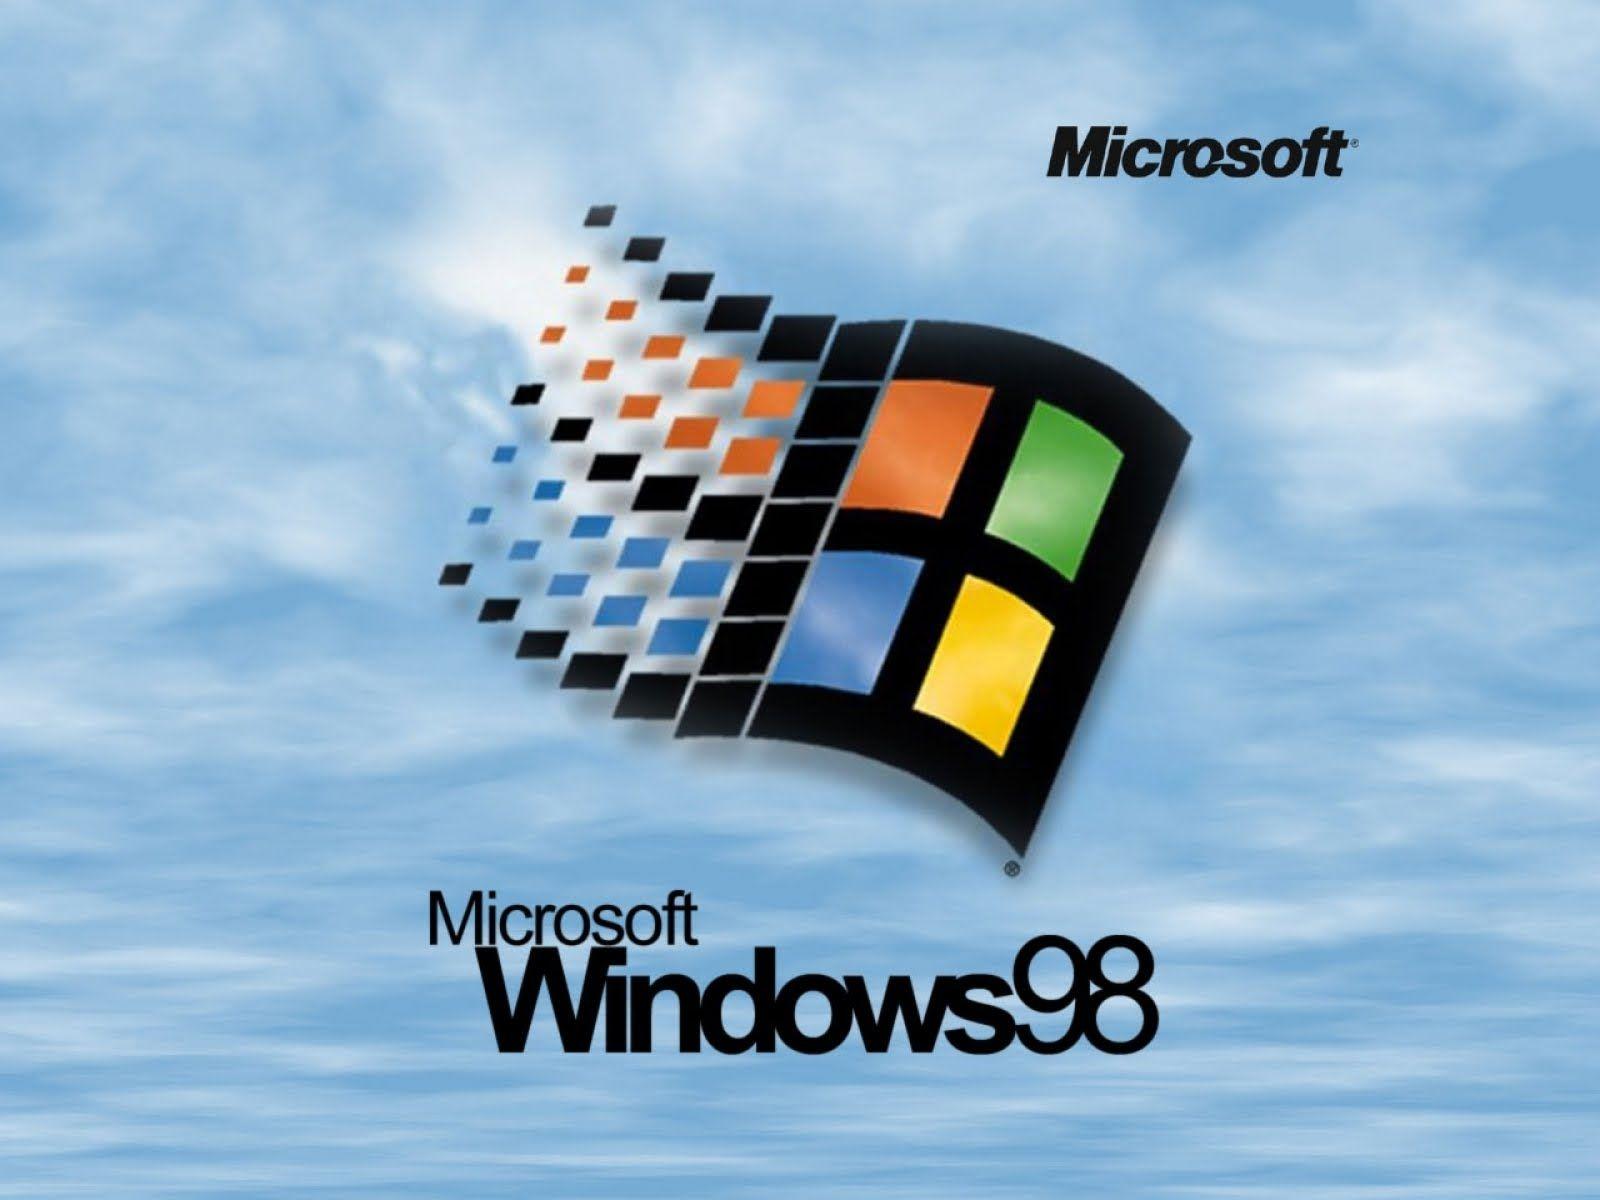 Windows 98 Boot and Intro